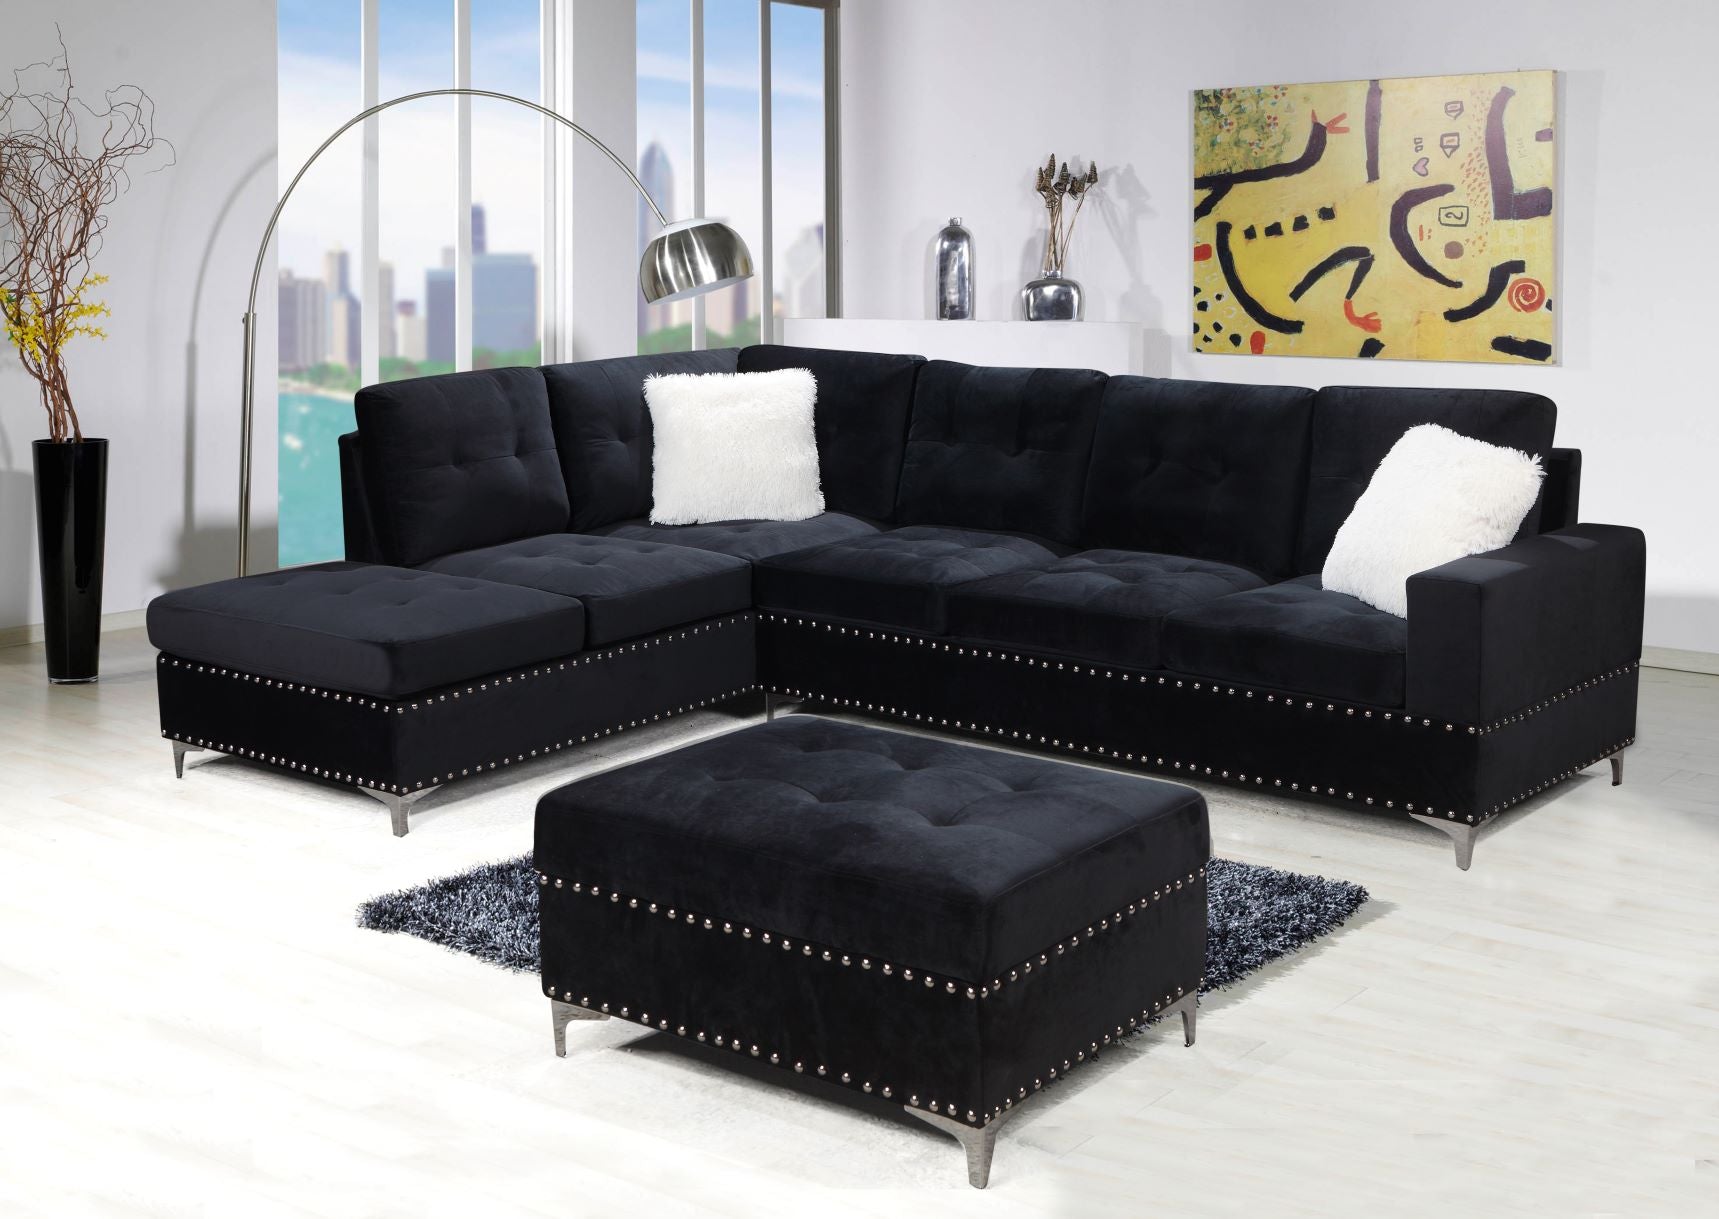 Luxurious Microfiber Sectional Sofa with Versatile Chaise and Storage Ottoman